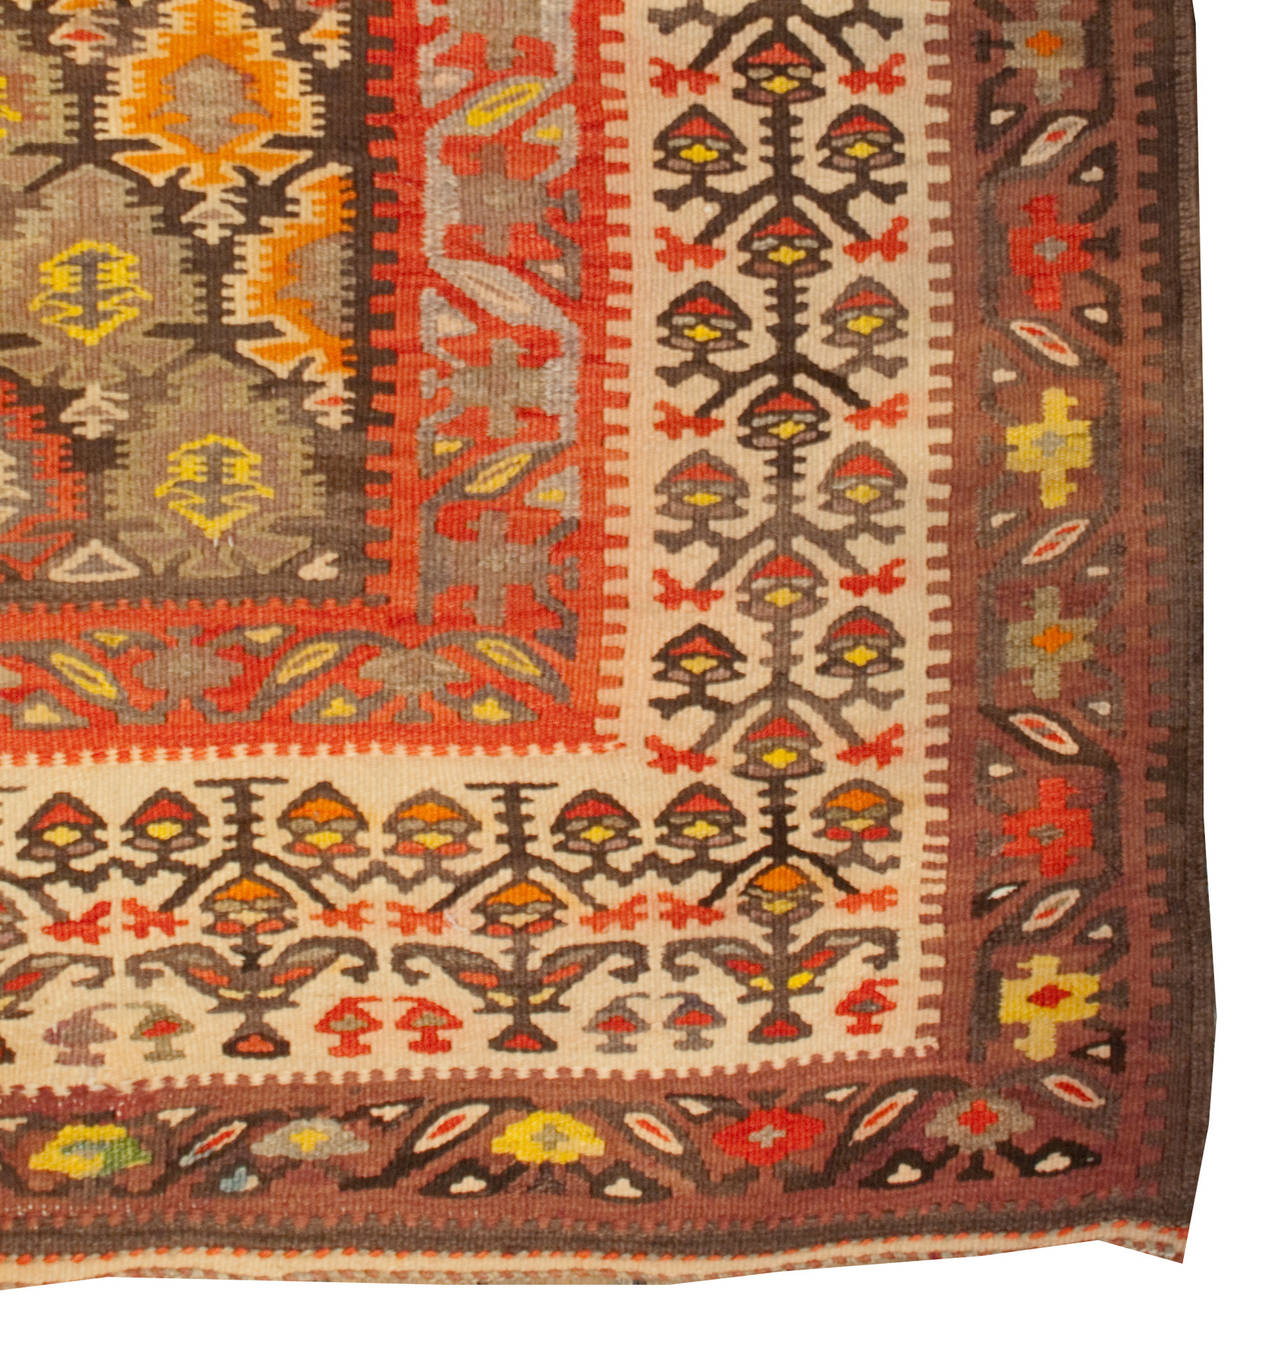 An early 20th century Persian Qazvin Kilim runner with a multicolored all-over tree-of-life pattern surrounded by multiple contrasting floral borders.